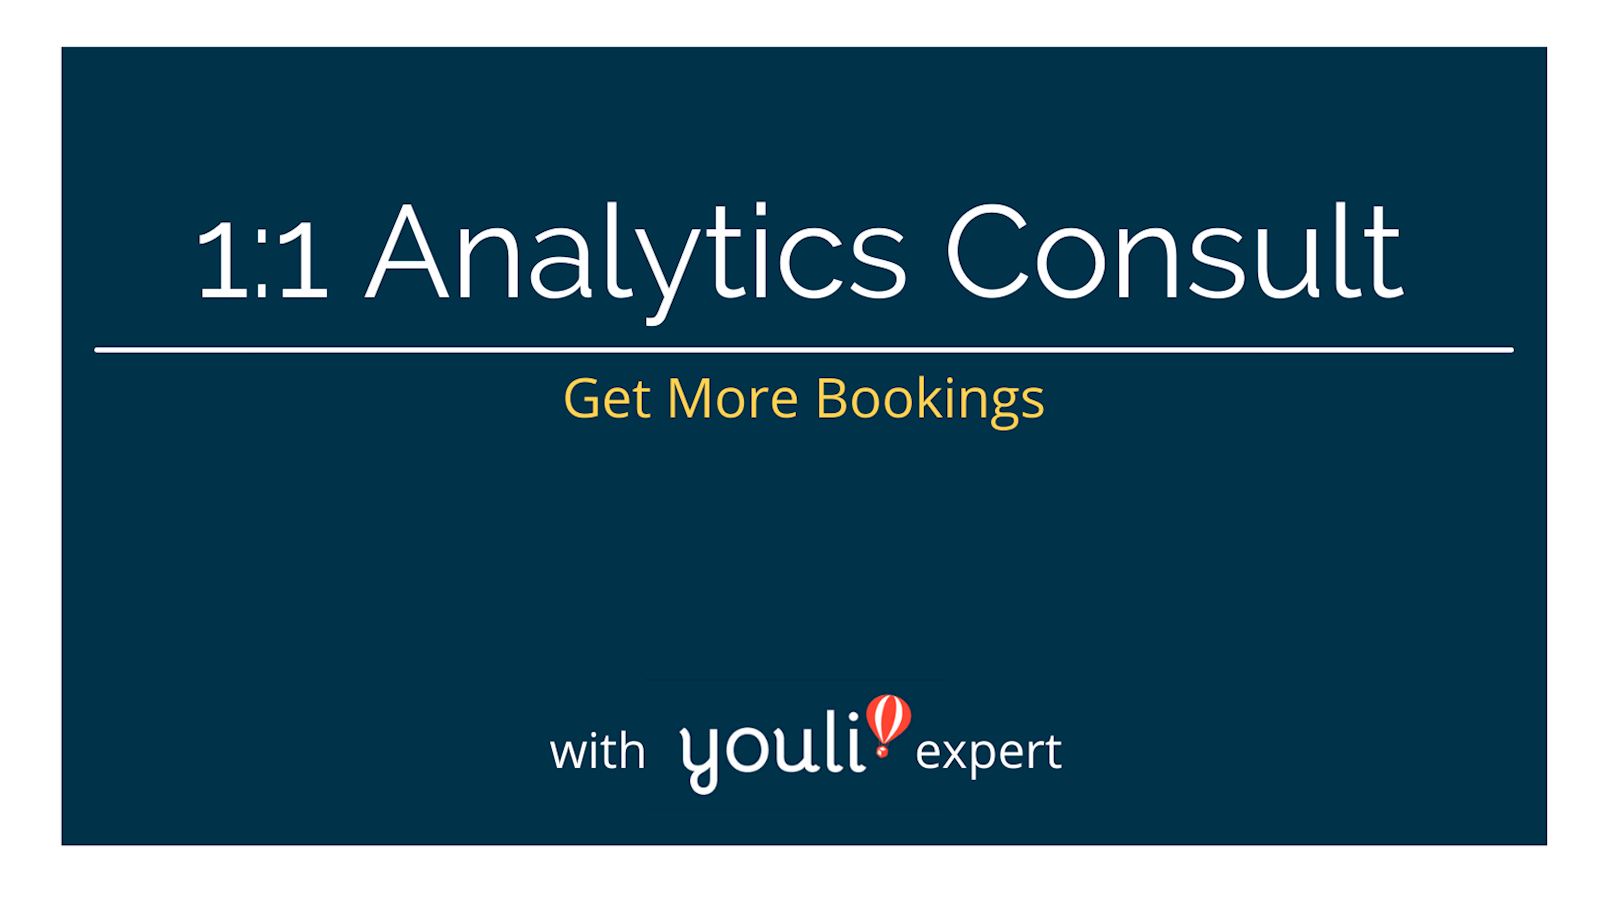 1:1 Analytics Consult with YouLi expert